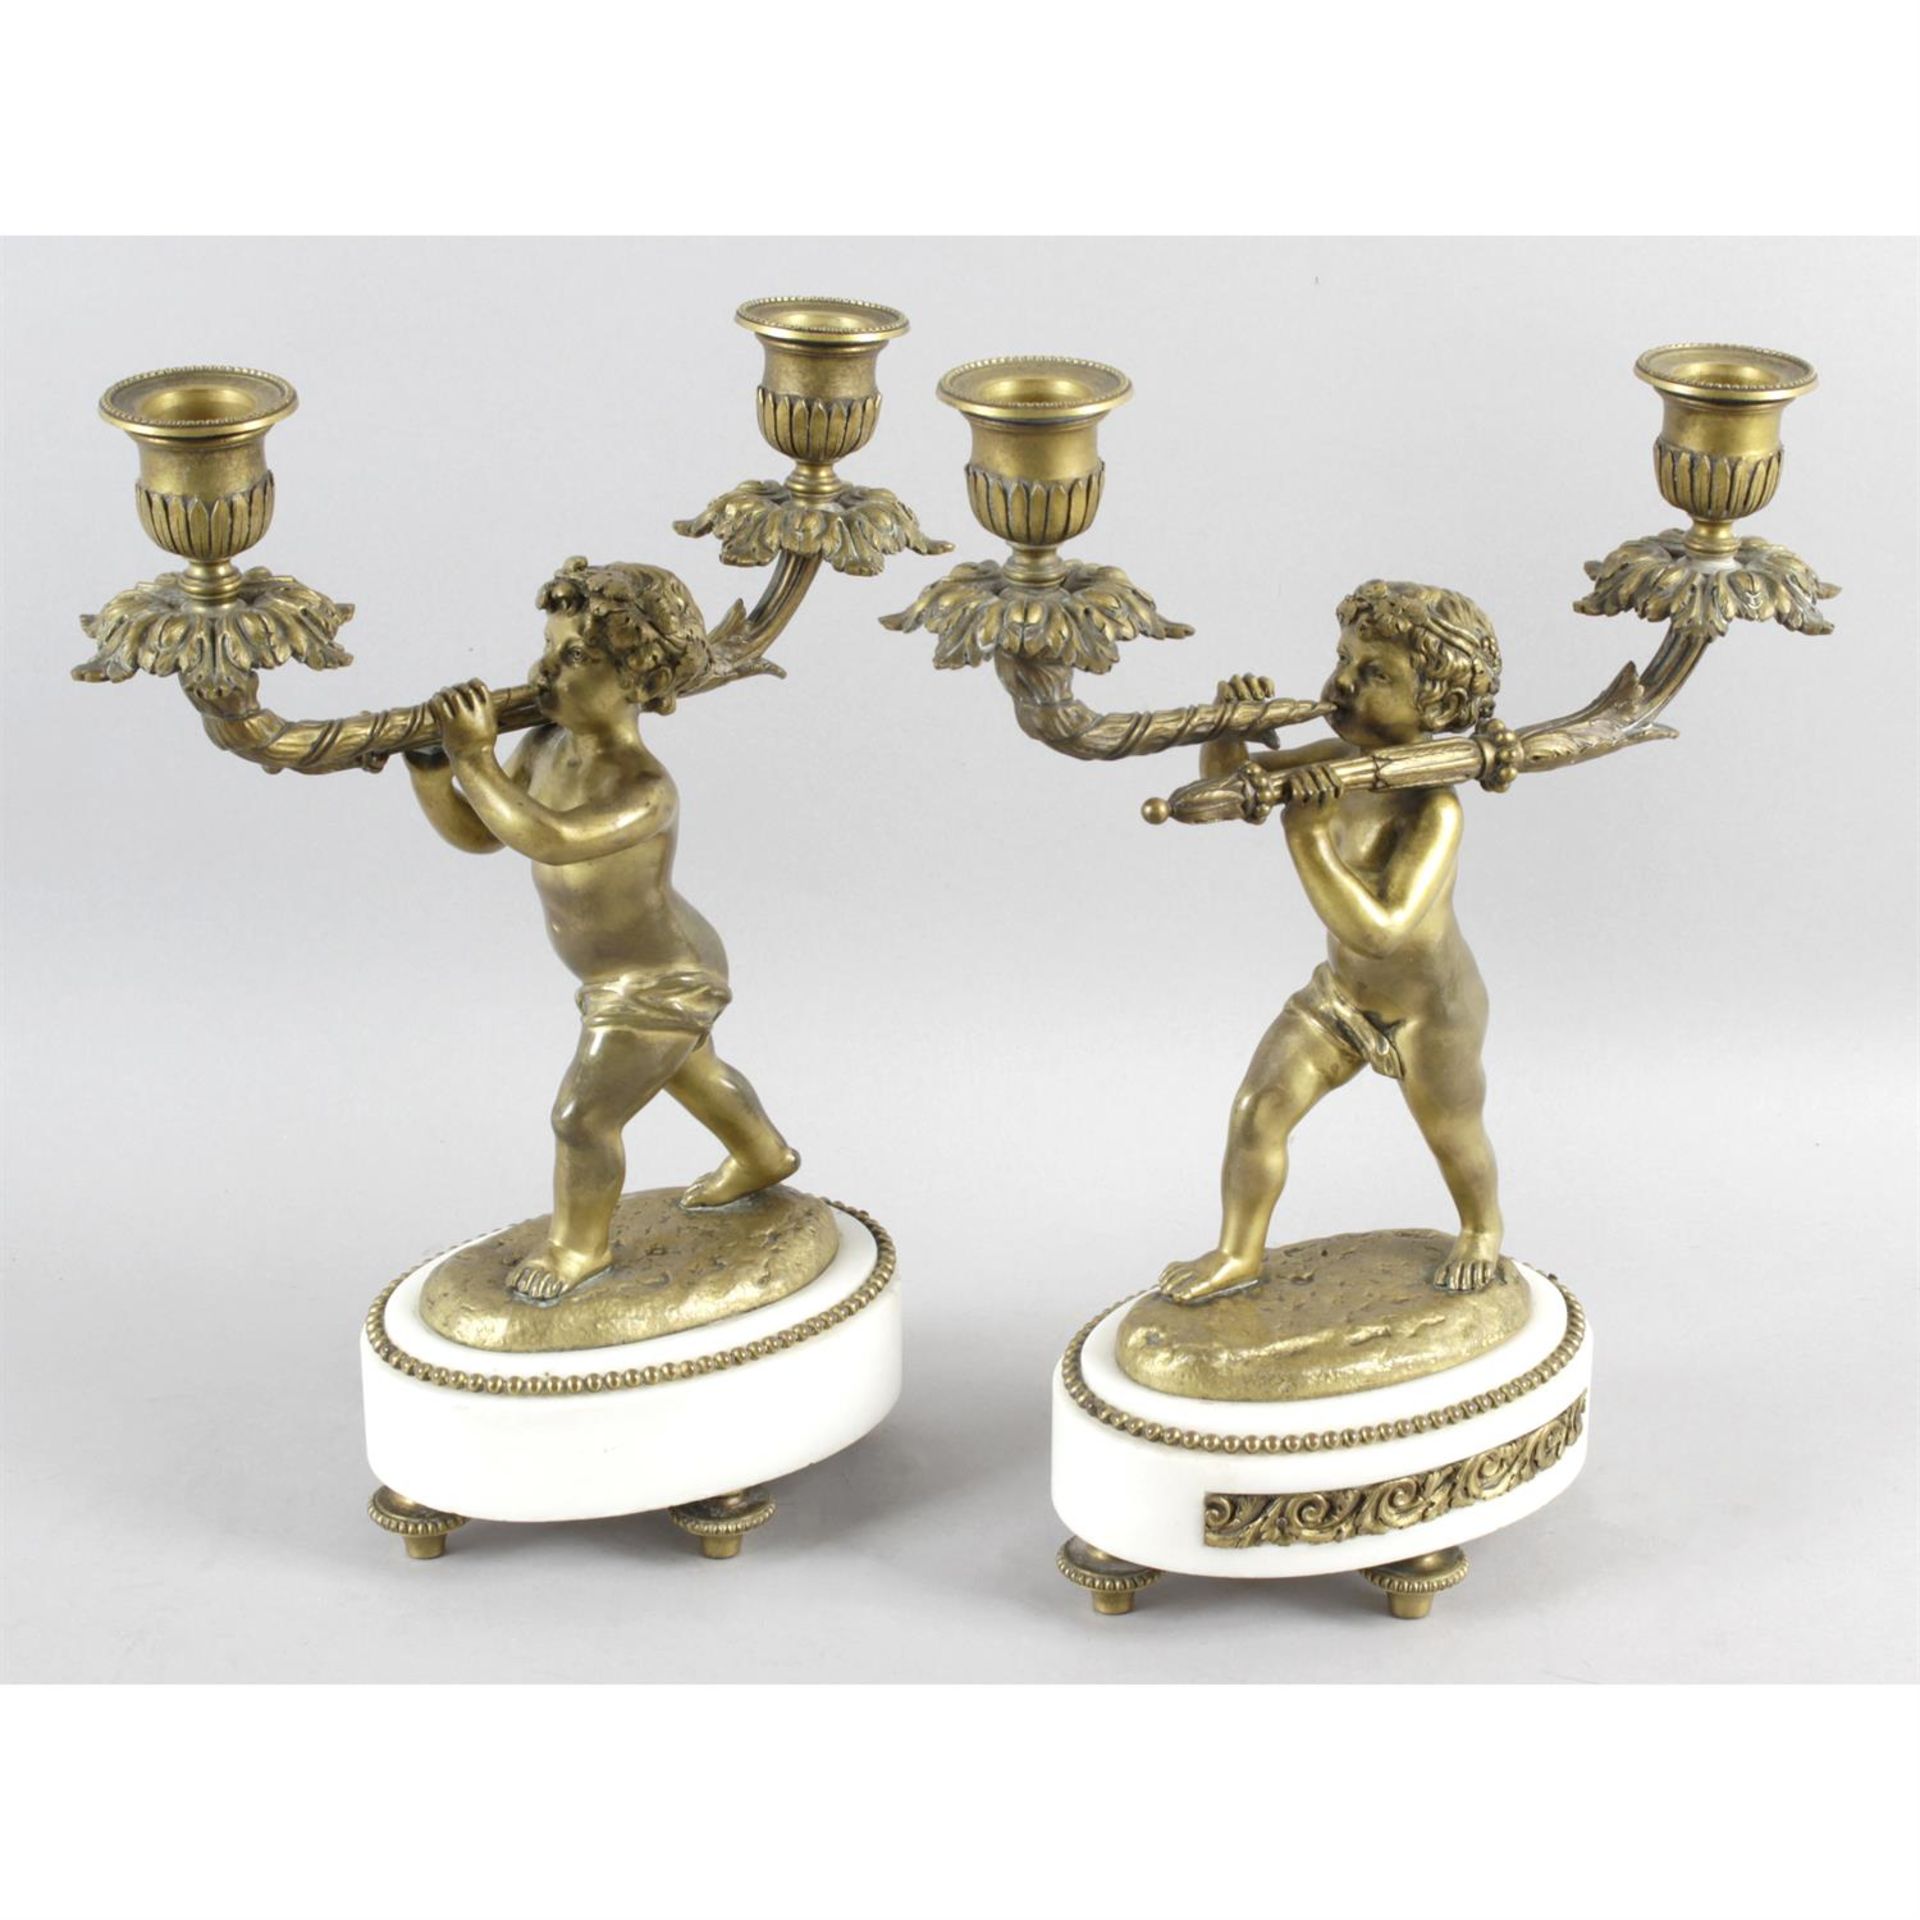 A pair of late 19th century gilt bronze candle holders.